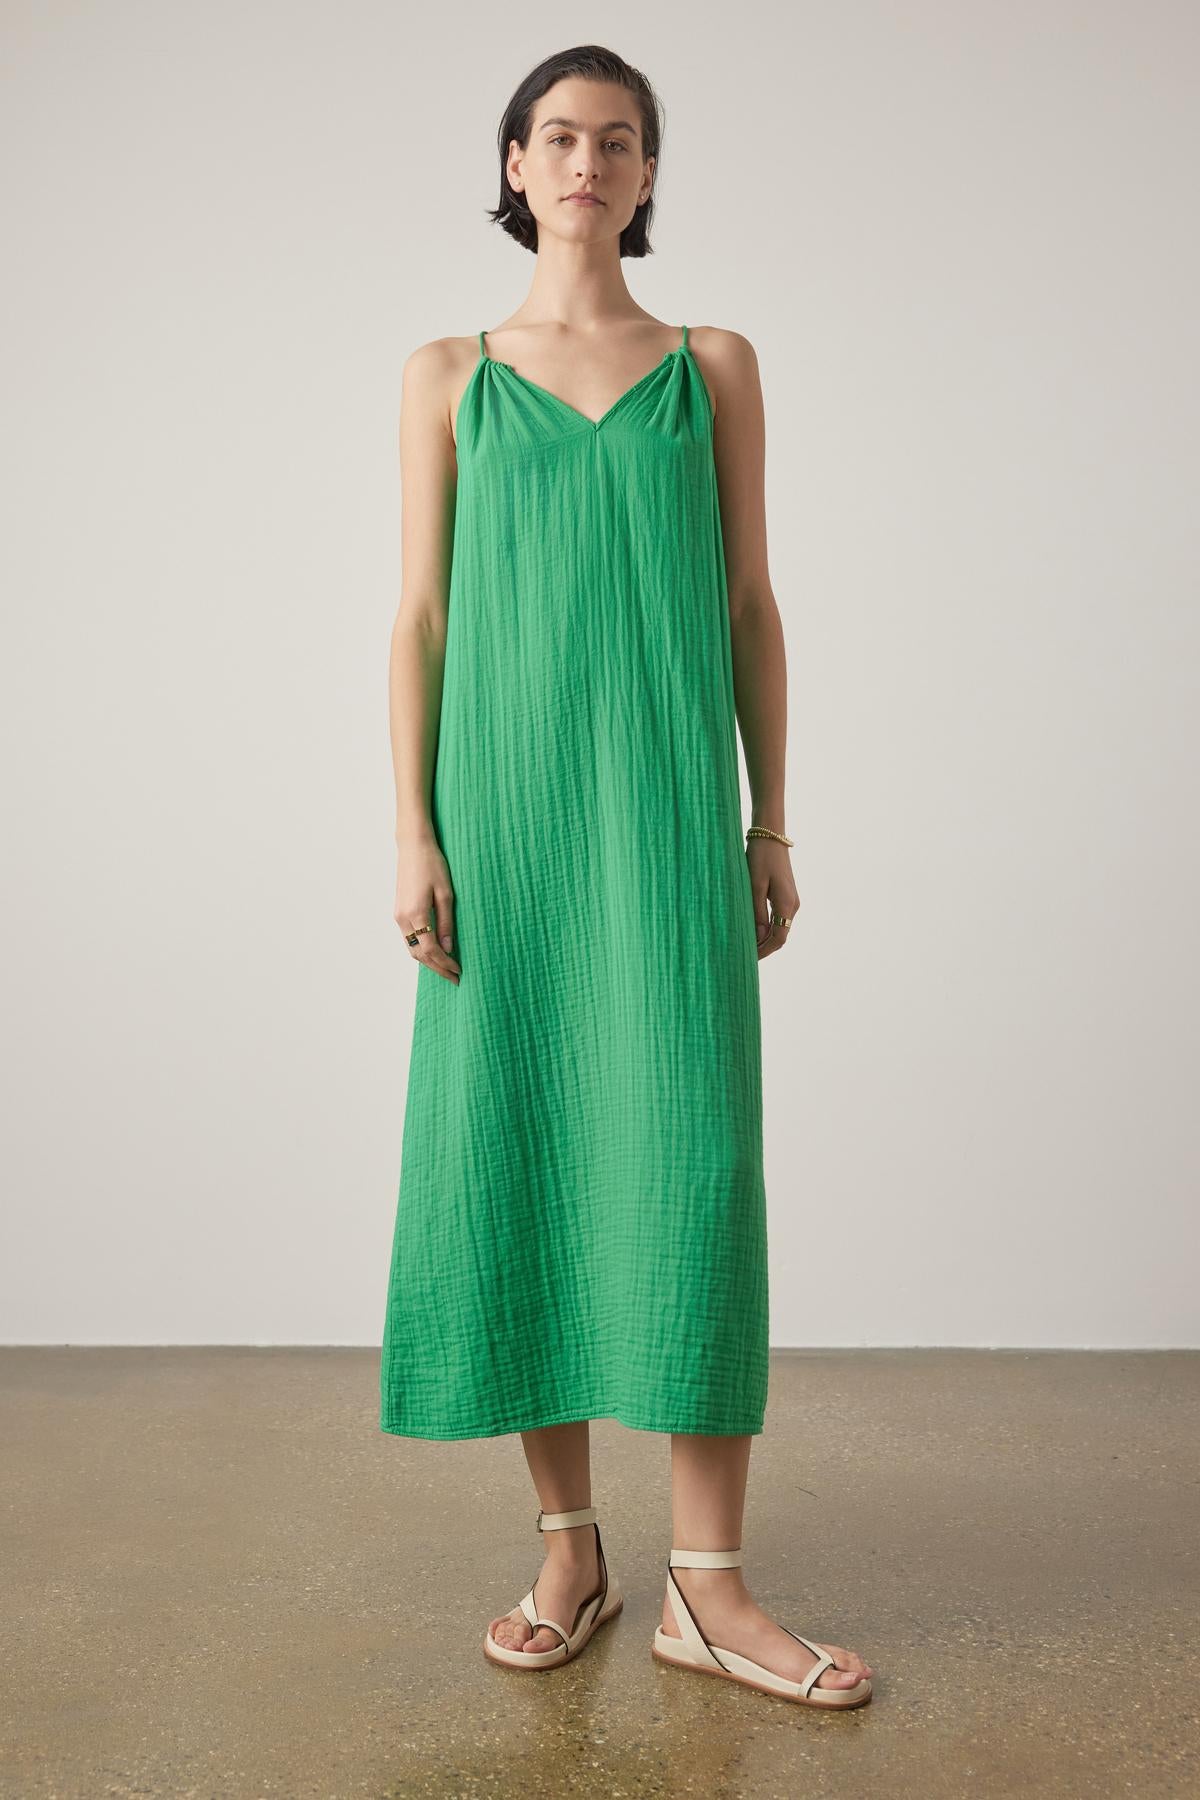 A woman stands wearing a CARRILLO DRESS by Velvet by Jenny Graham, featuring a bright green, pleated maxi design with thin straps. She has paired this dress with light-colored flat sandals against a neutral background.-36863272091841